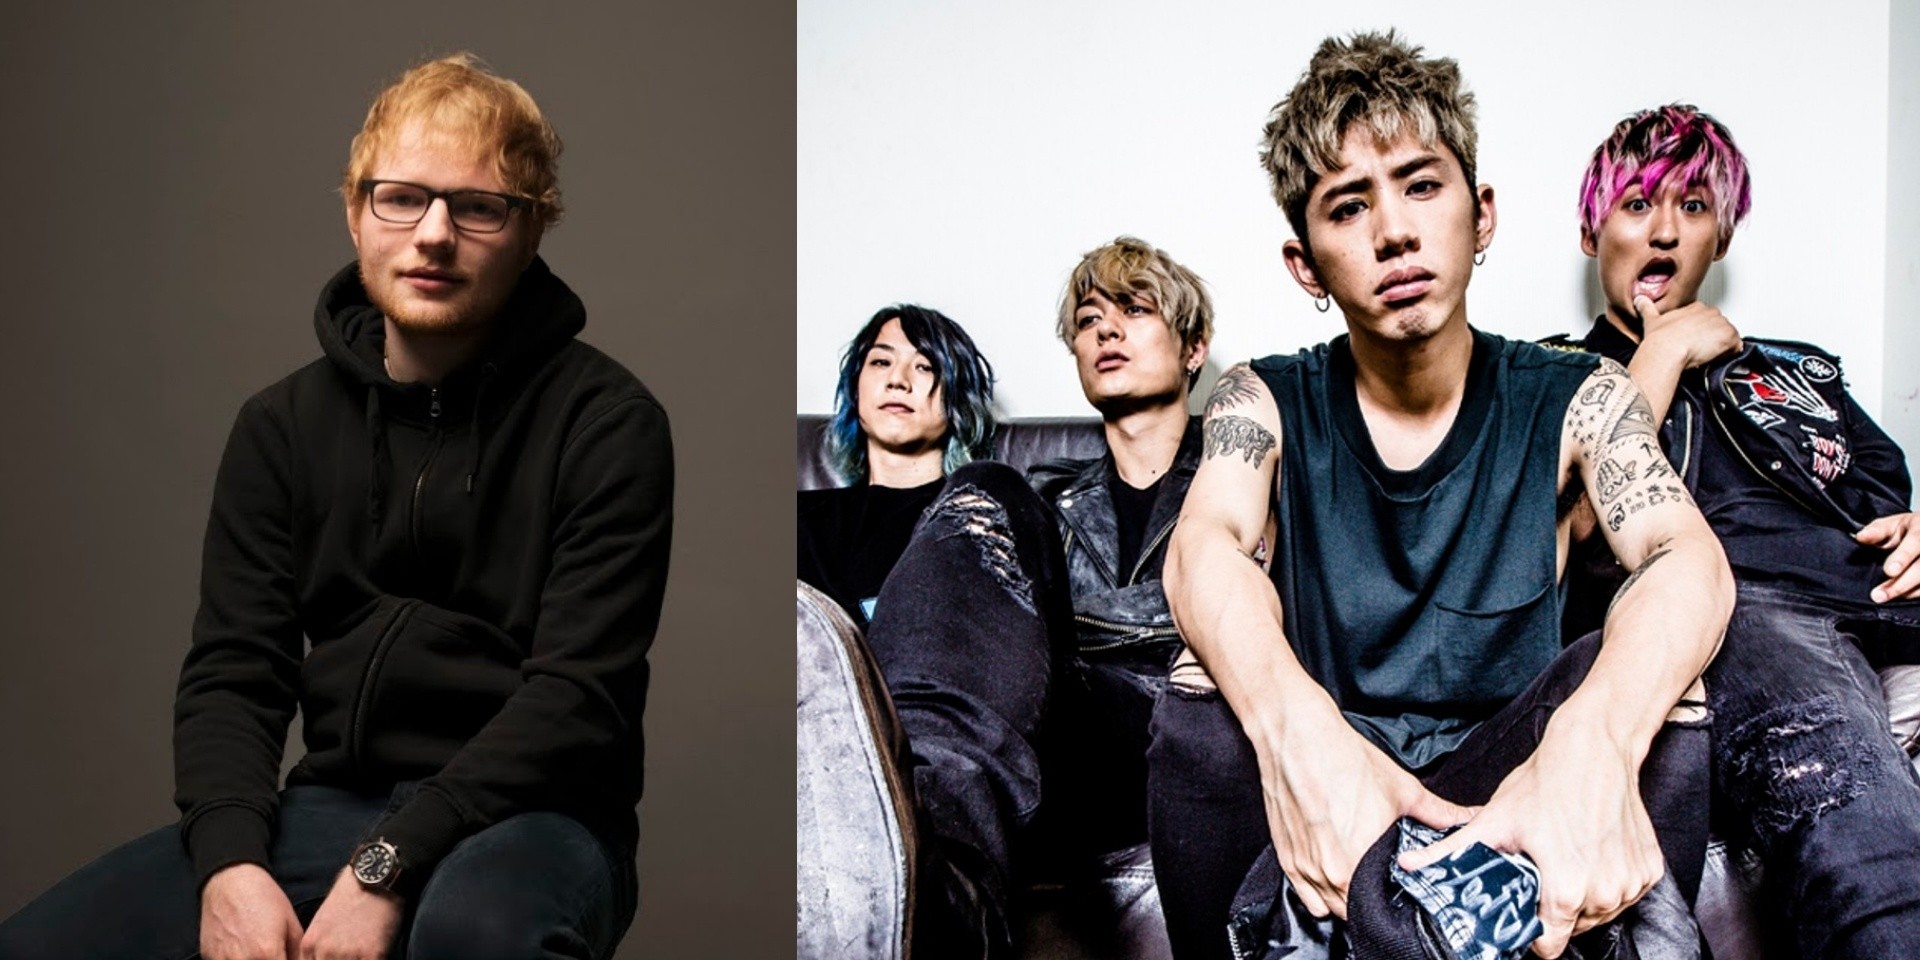 Ed Sheeran and ONE OK ROCK are in the studio together